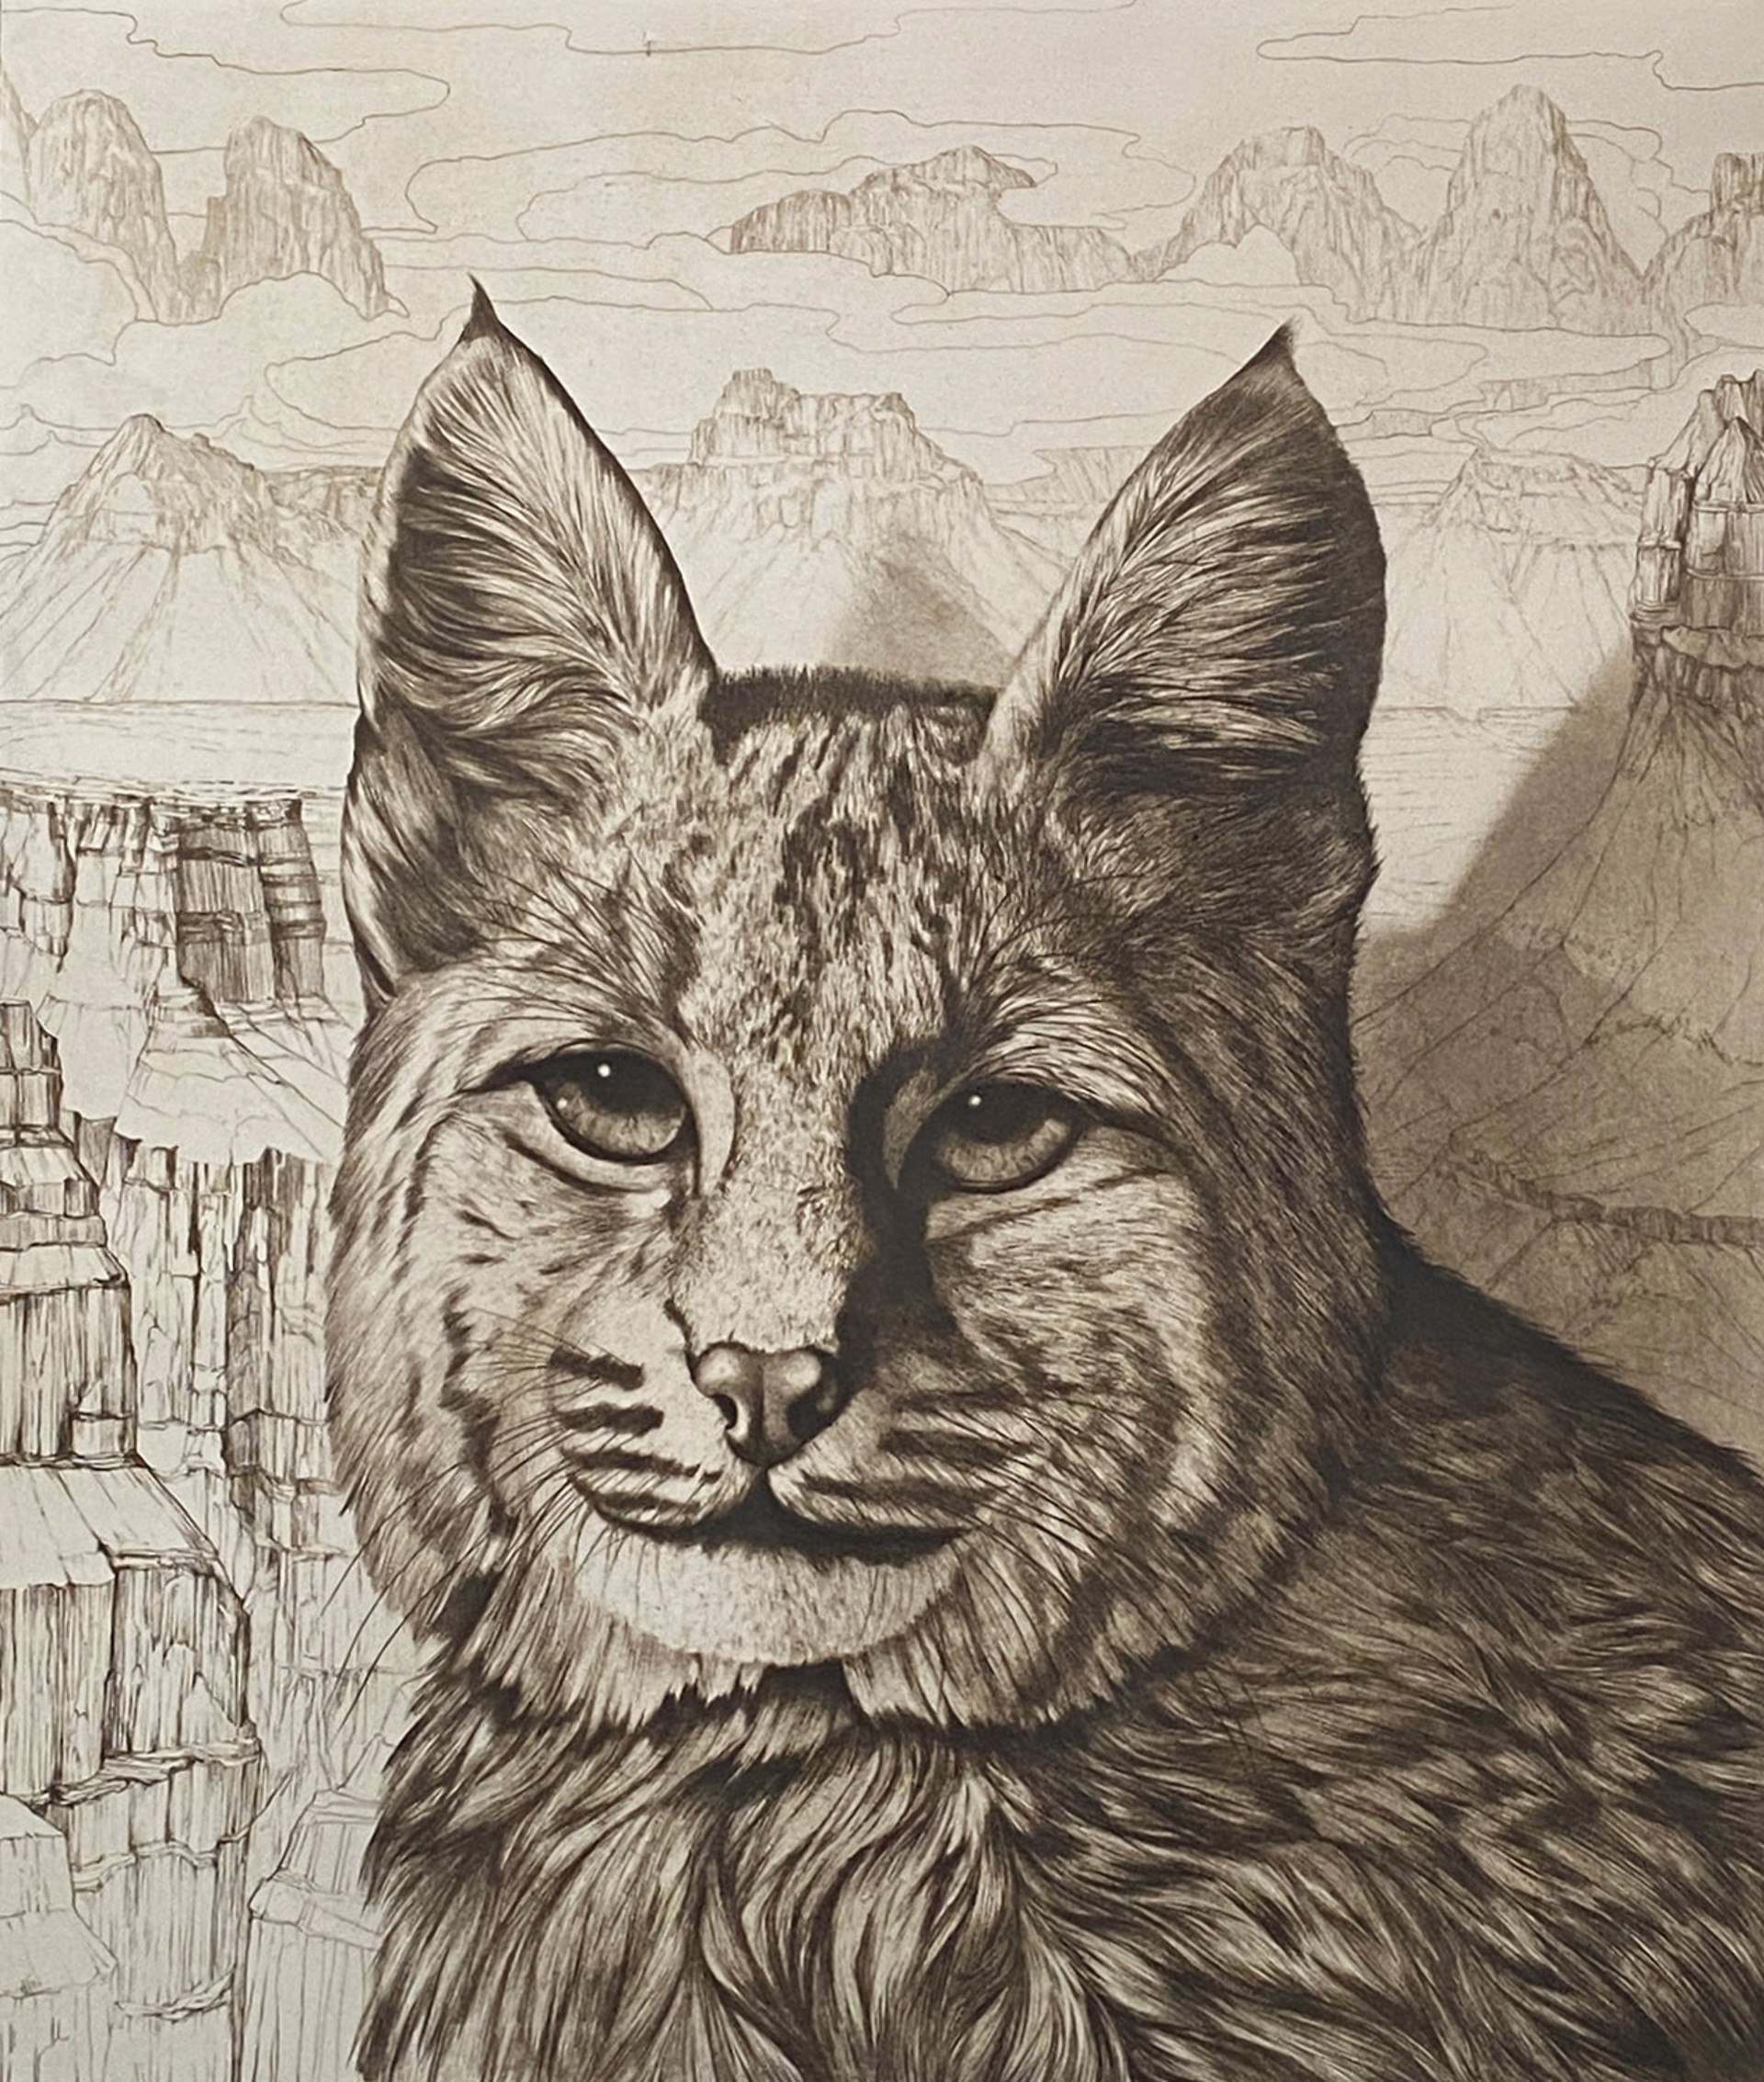 Bobcat by Tom Palmore